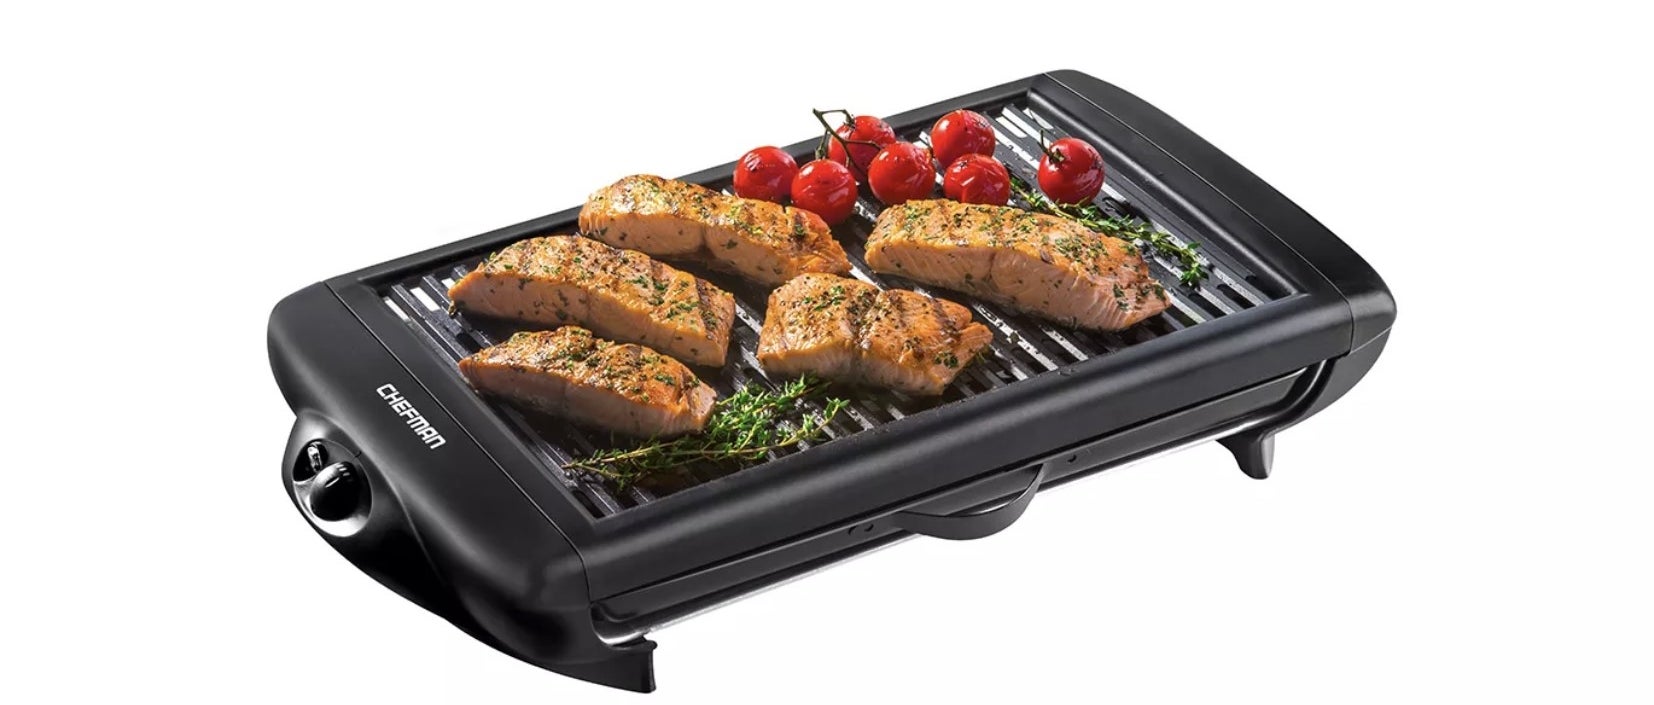 the smokeless indoor grill with salmon, tomatoes, and fresh herbs on it 